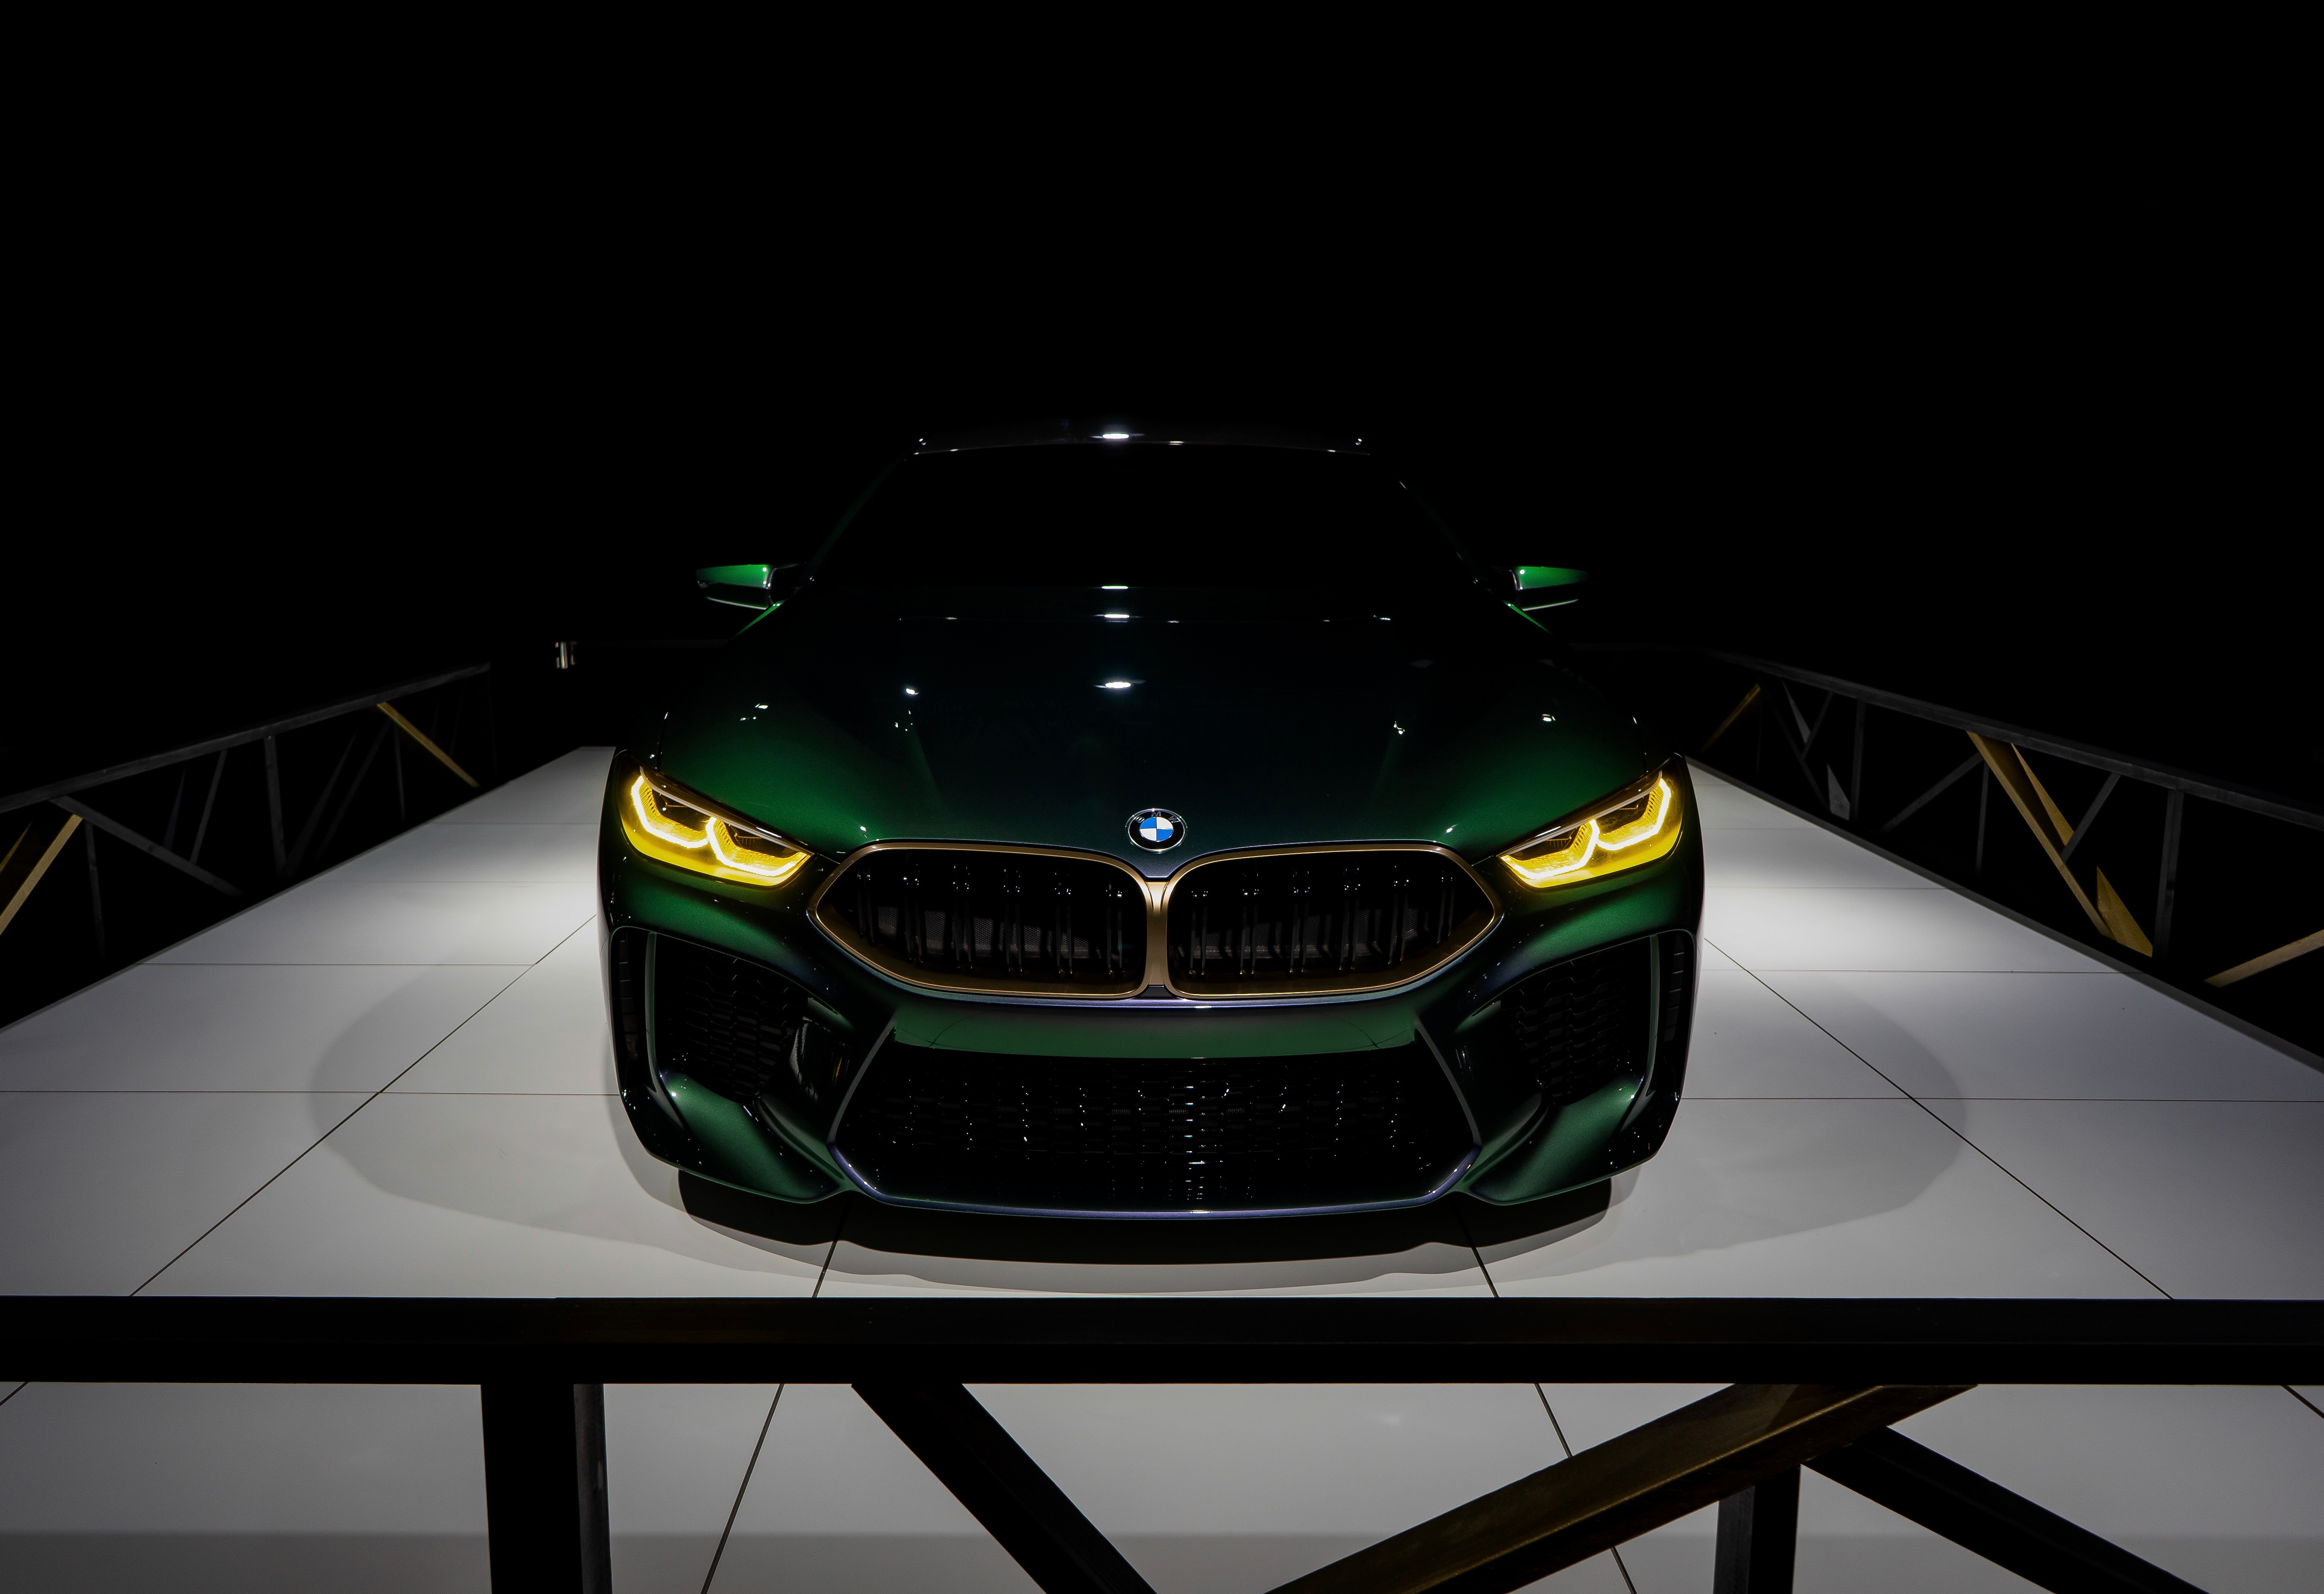 144331 download wallpaper bmw, cars, front view, shadows, bumper screensavers and pictures for free